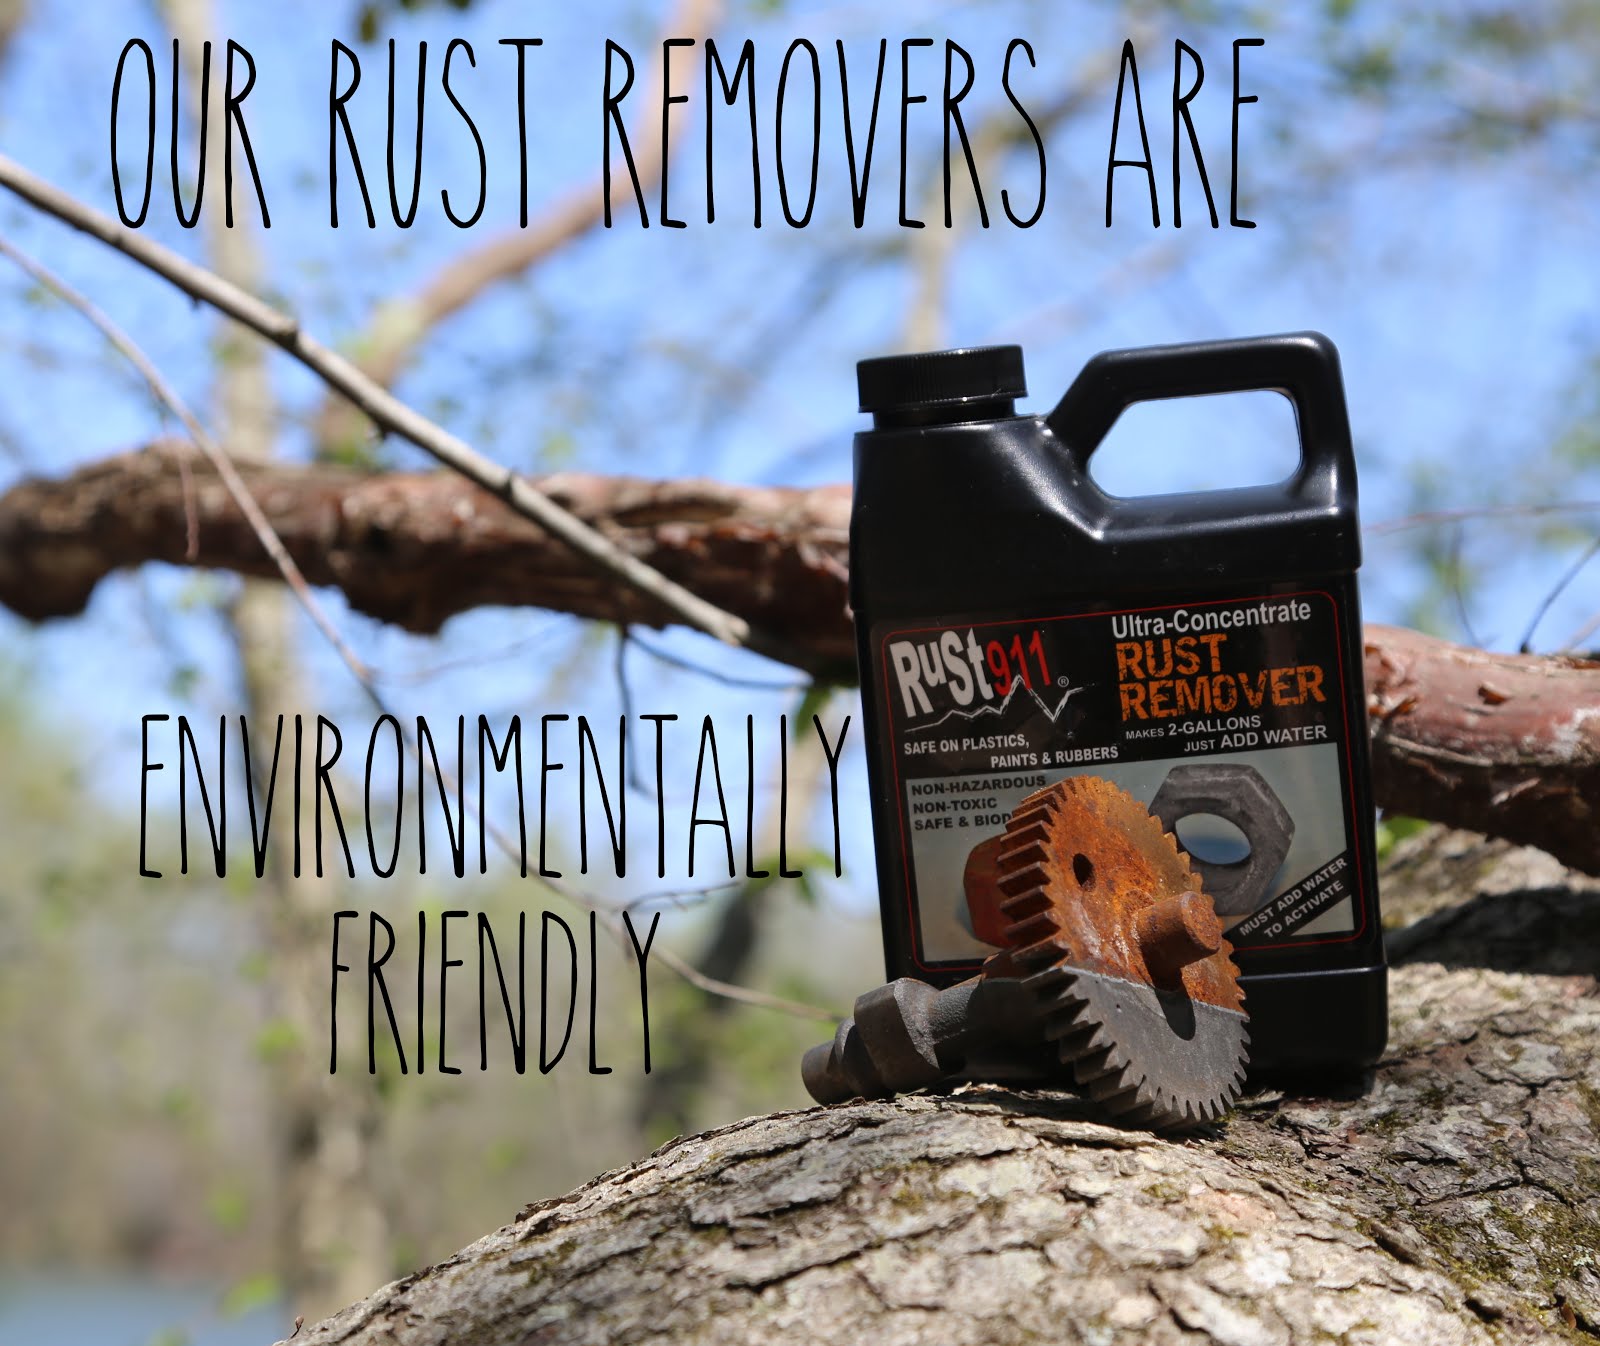 Rust911: Rust Remover Makes 16-Gallons of Economical, Safe-to-Use and Powerful C